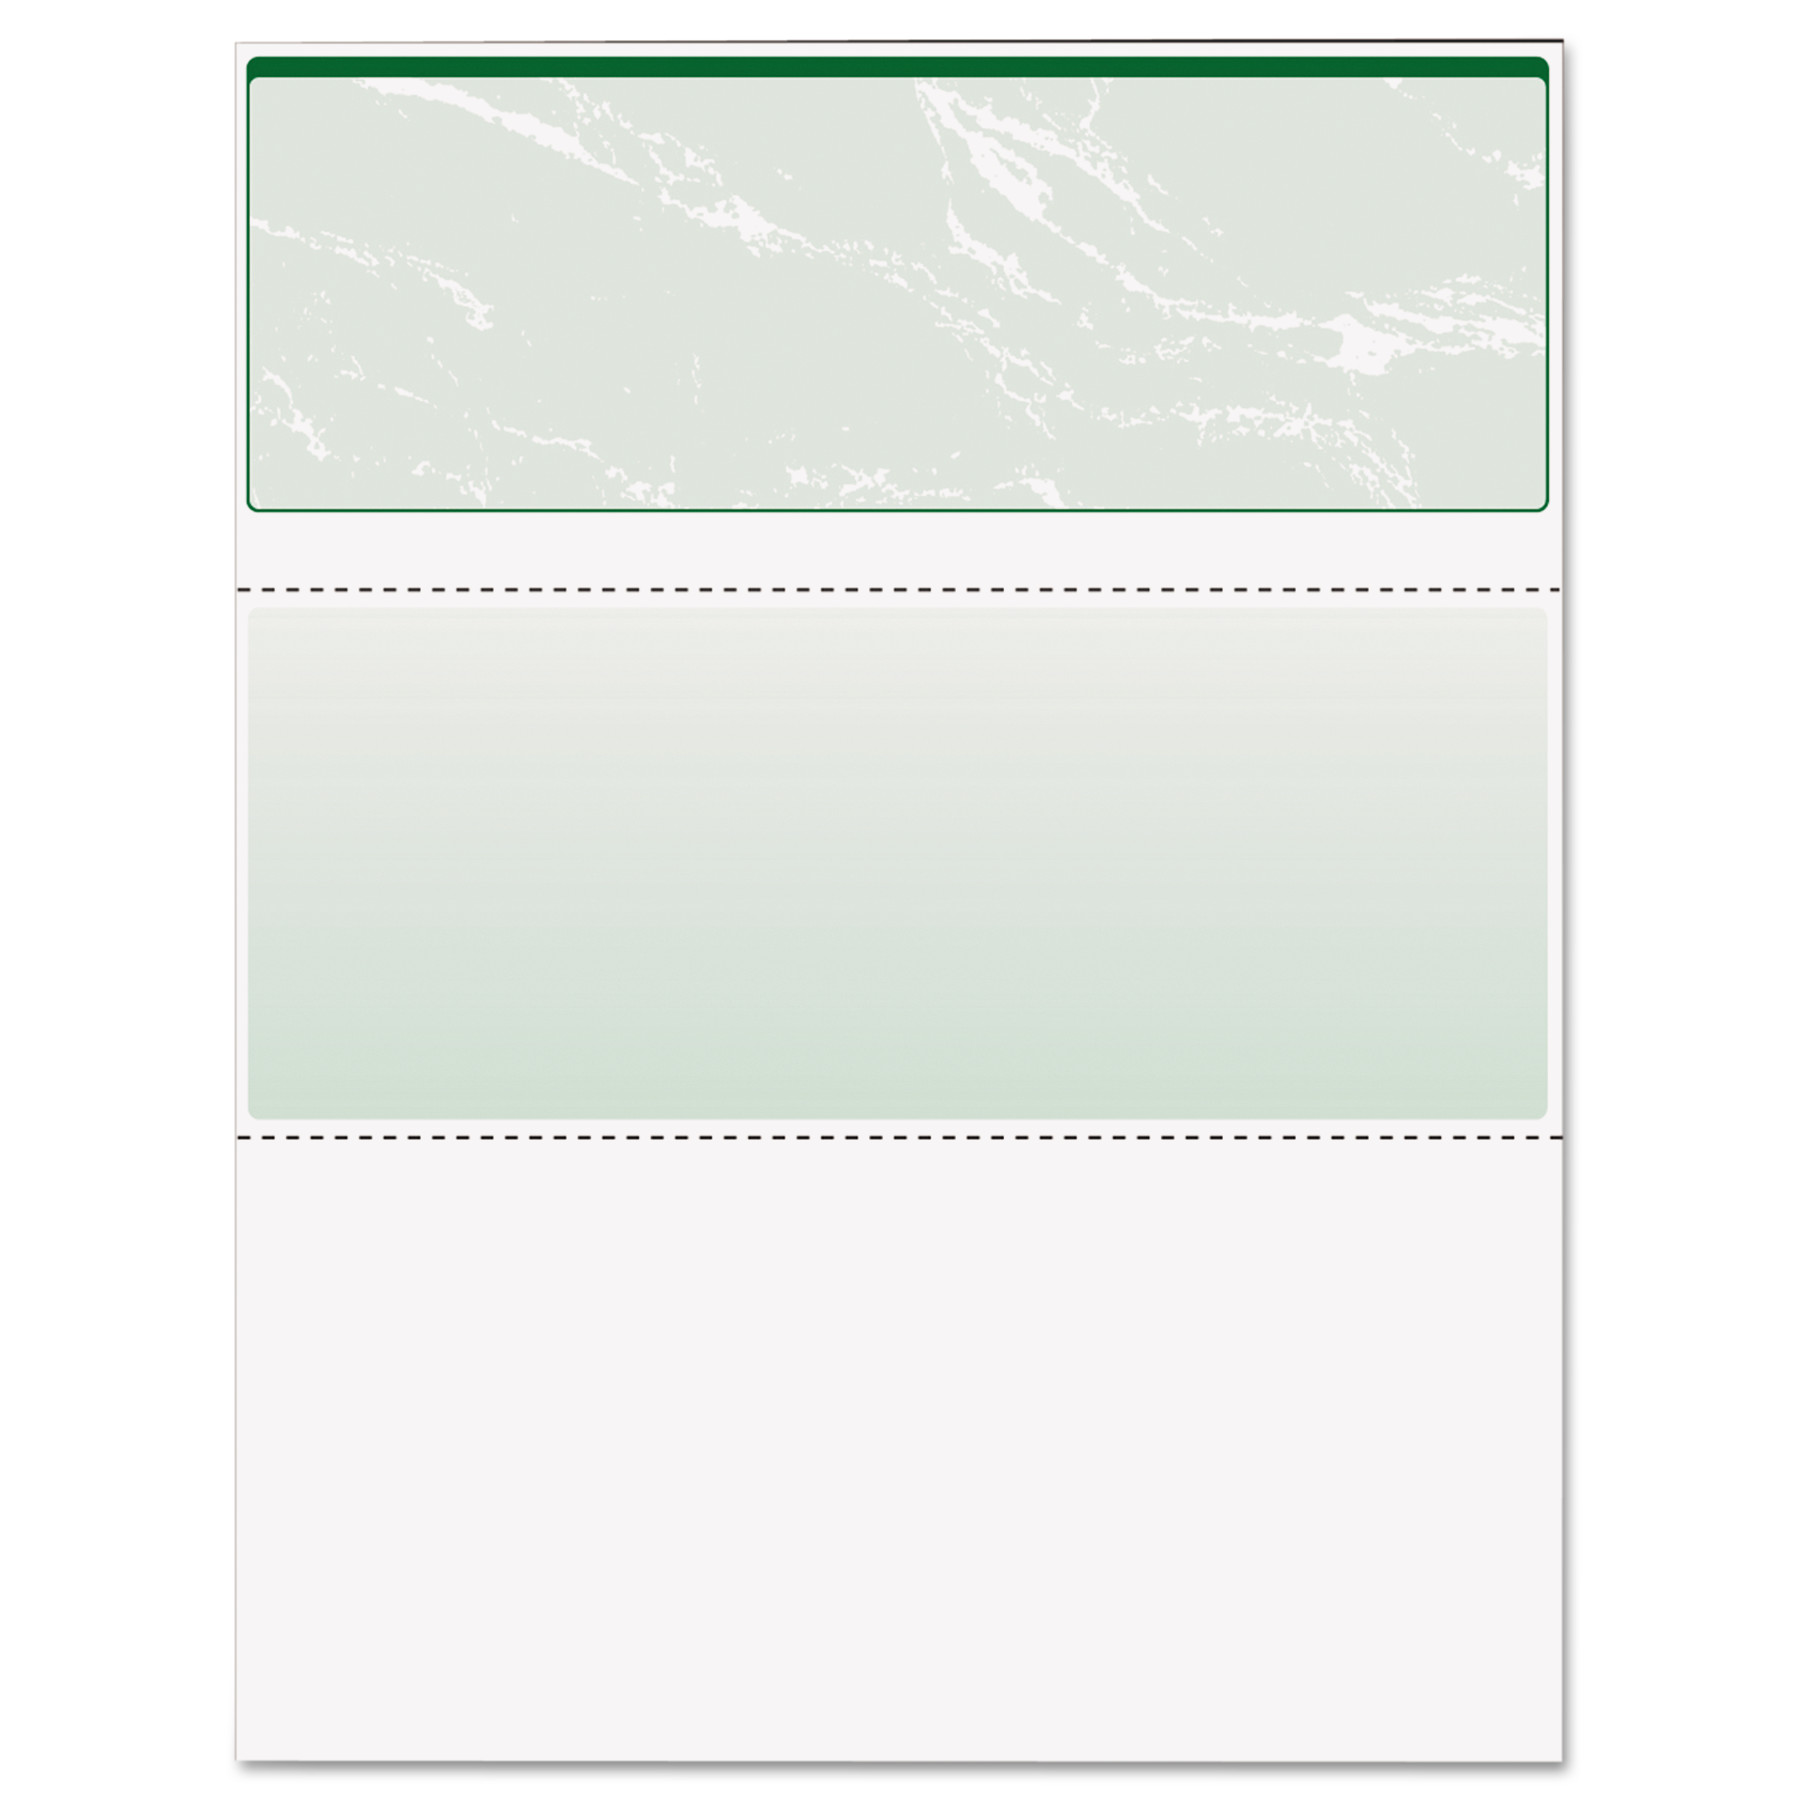 DocuGard High Security Green Marble Business Checks with 11 Features to Prevent Fraud - Letter - 8 1/2" x 11" - 24 lb Basis Weig